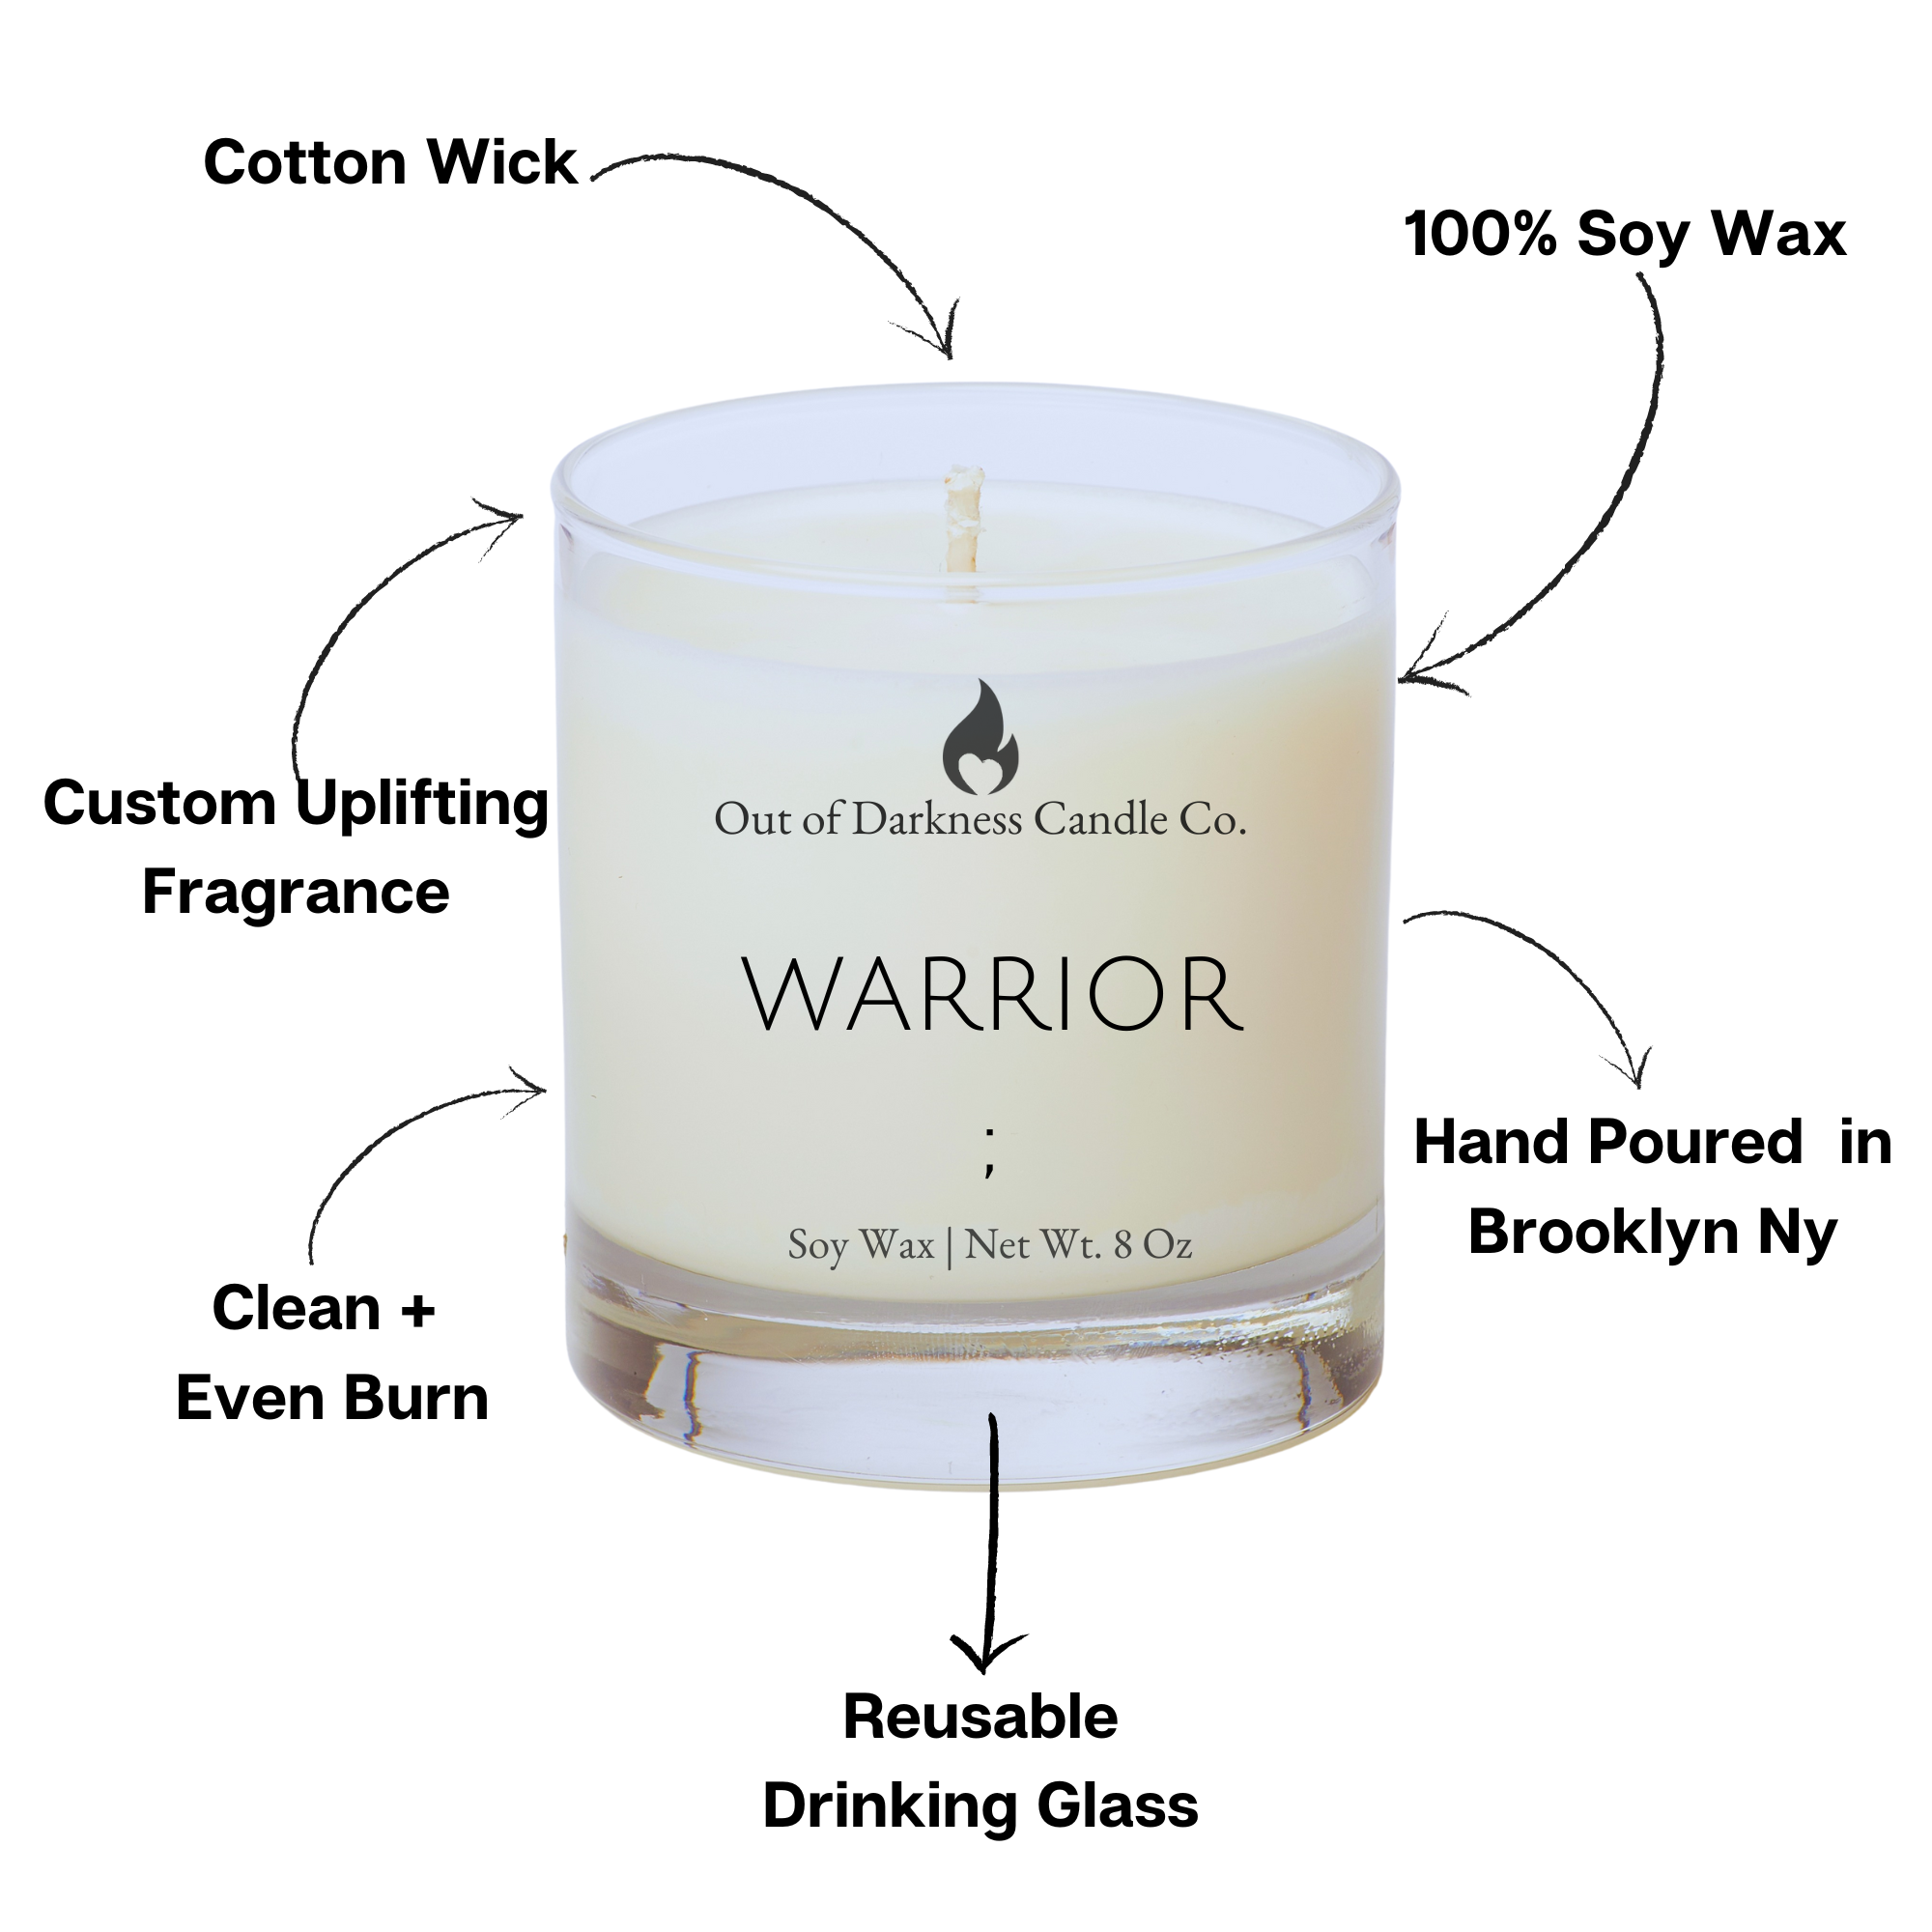 Clear Glass Jar 8 oz Soy Candle that has a black flame company logo on the top- Out of Darkness Candle Co right beneath it In larger letters centered in the middle it states warrior with a semi colon  in all caps and below that Soy Wax Net Wt. 8 oz Around the candle are arrows that describe what is in the candle- 100% Soy Wax, Cotton Wick, Hand Poured in Brooklyn NY Resuable Drinking Glass, Clean and Even Burn,custom uplifting Fragrance